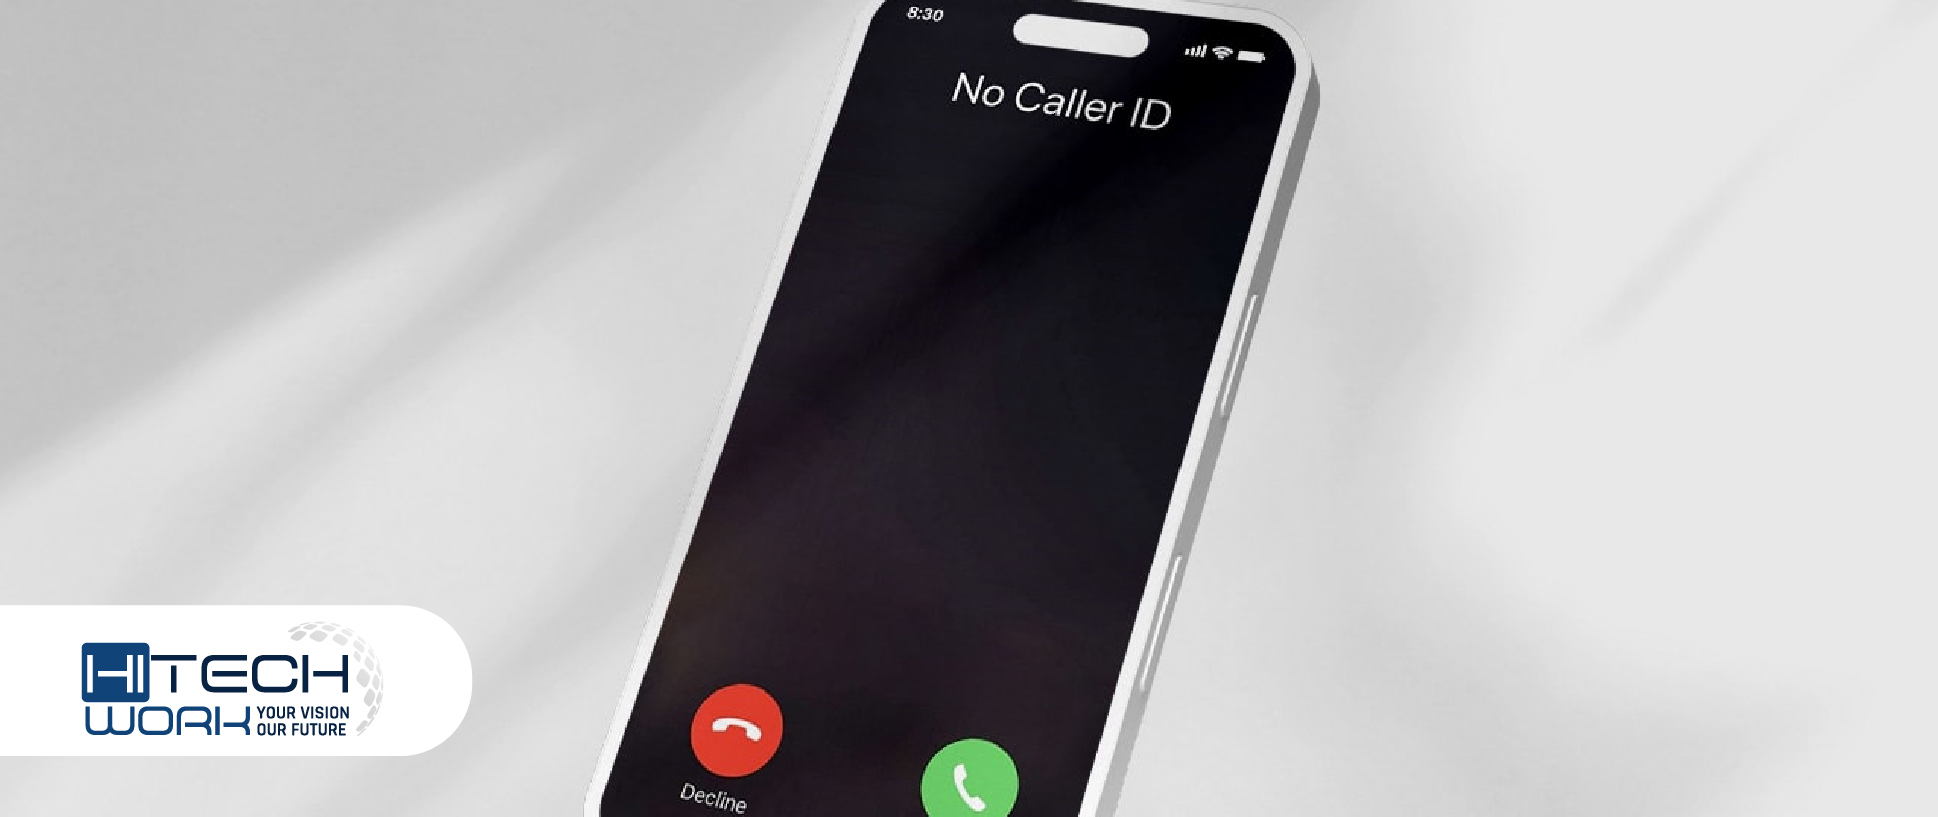 How to Change Caller id on iPhone